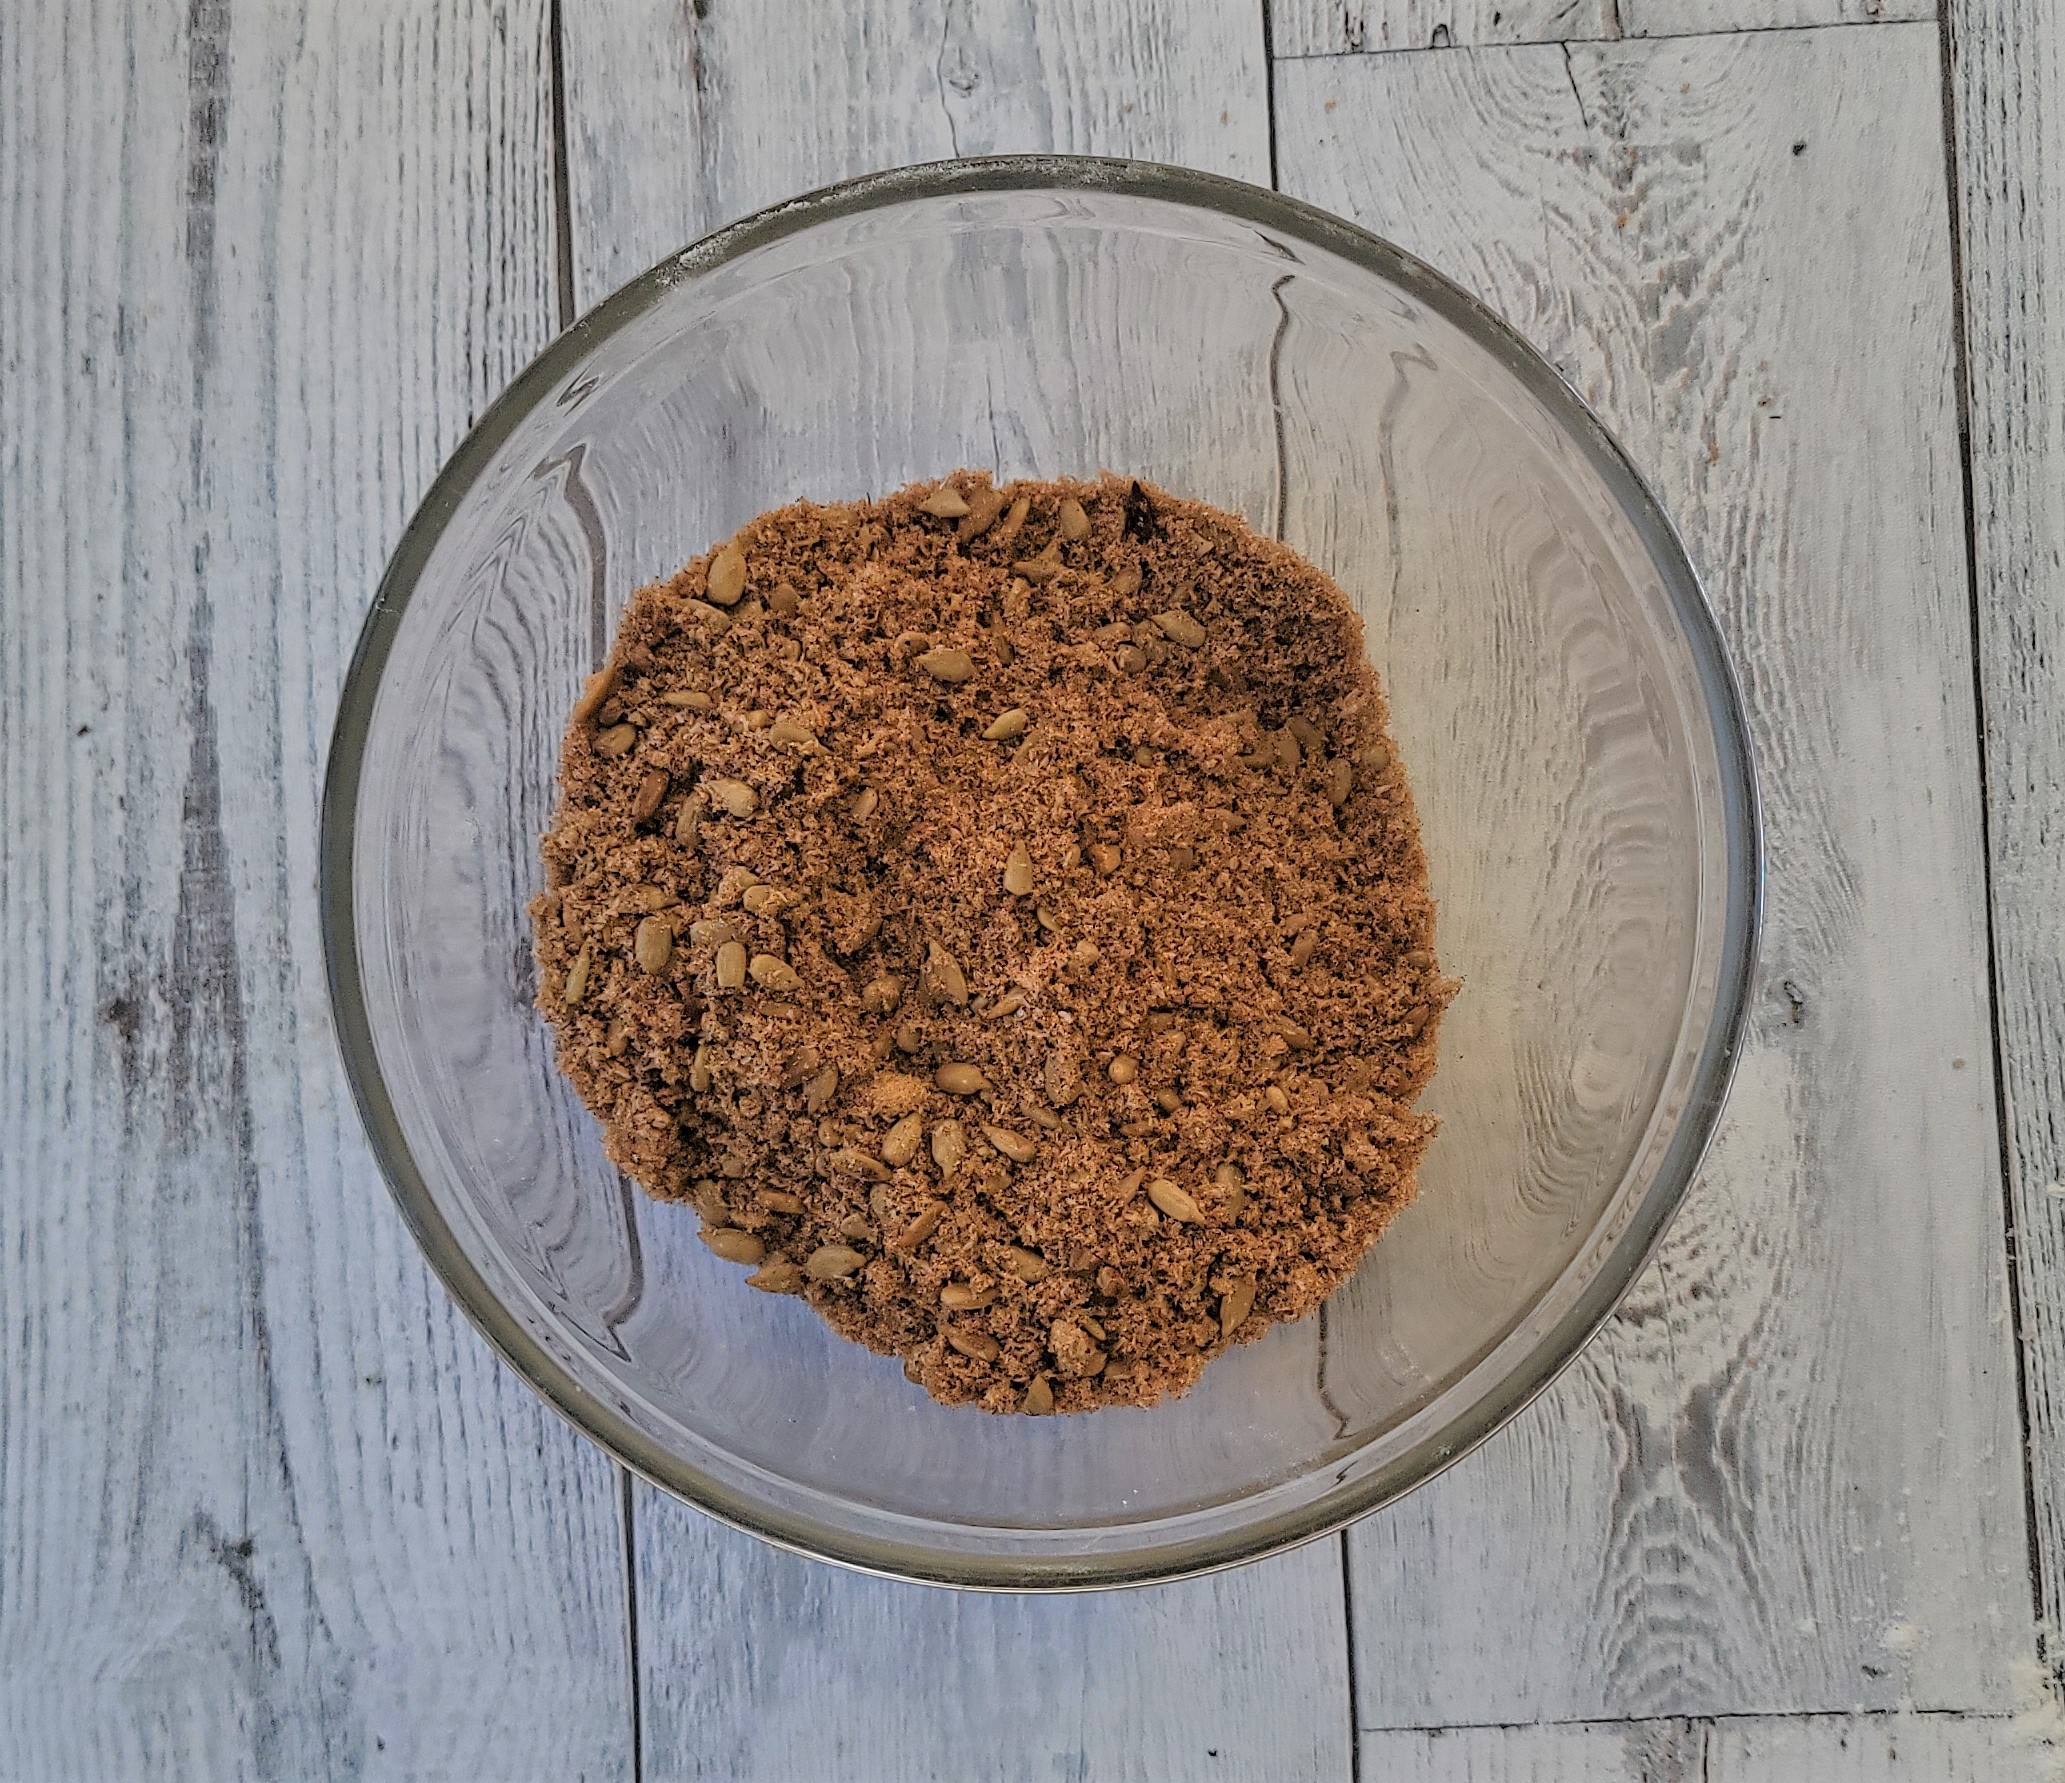 The Sunflower and Psyllium Crumbly Topping